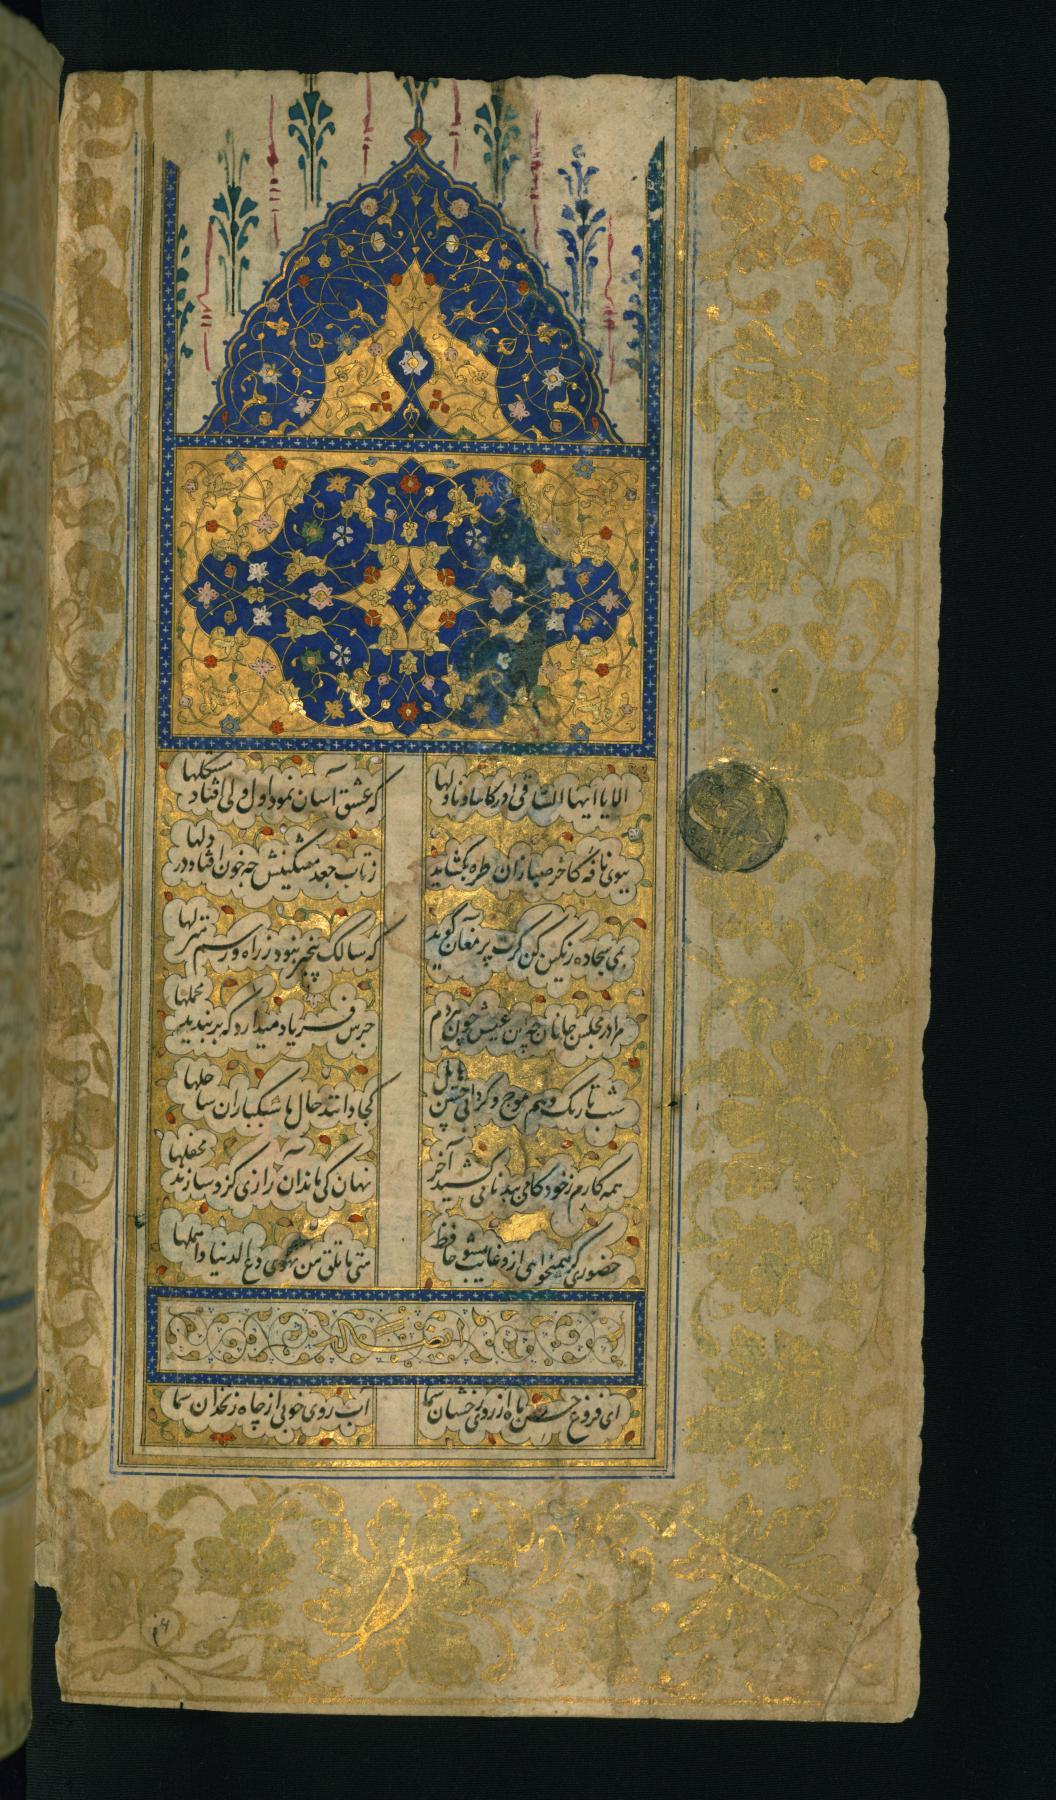 Image for Incipit Page with Illuminated Headpiece